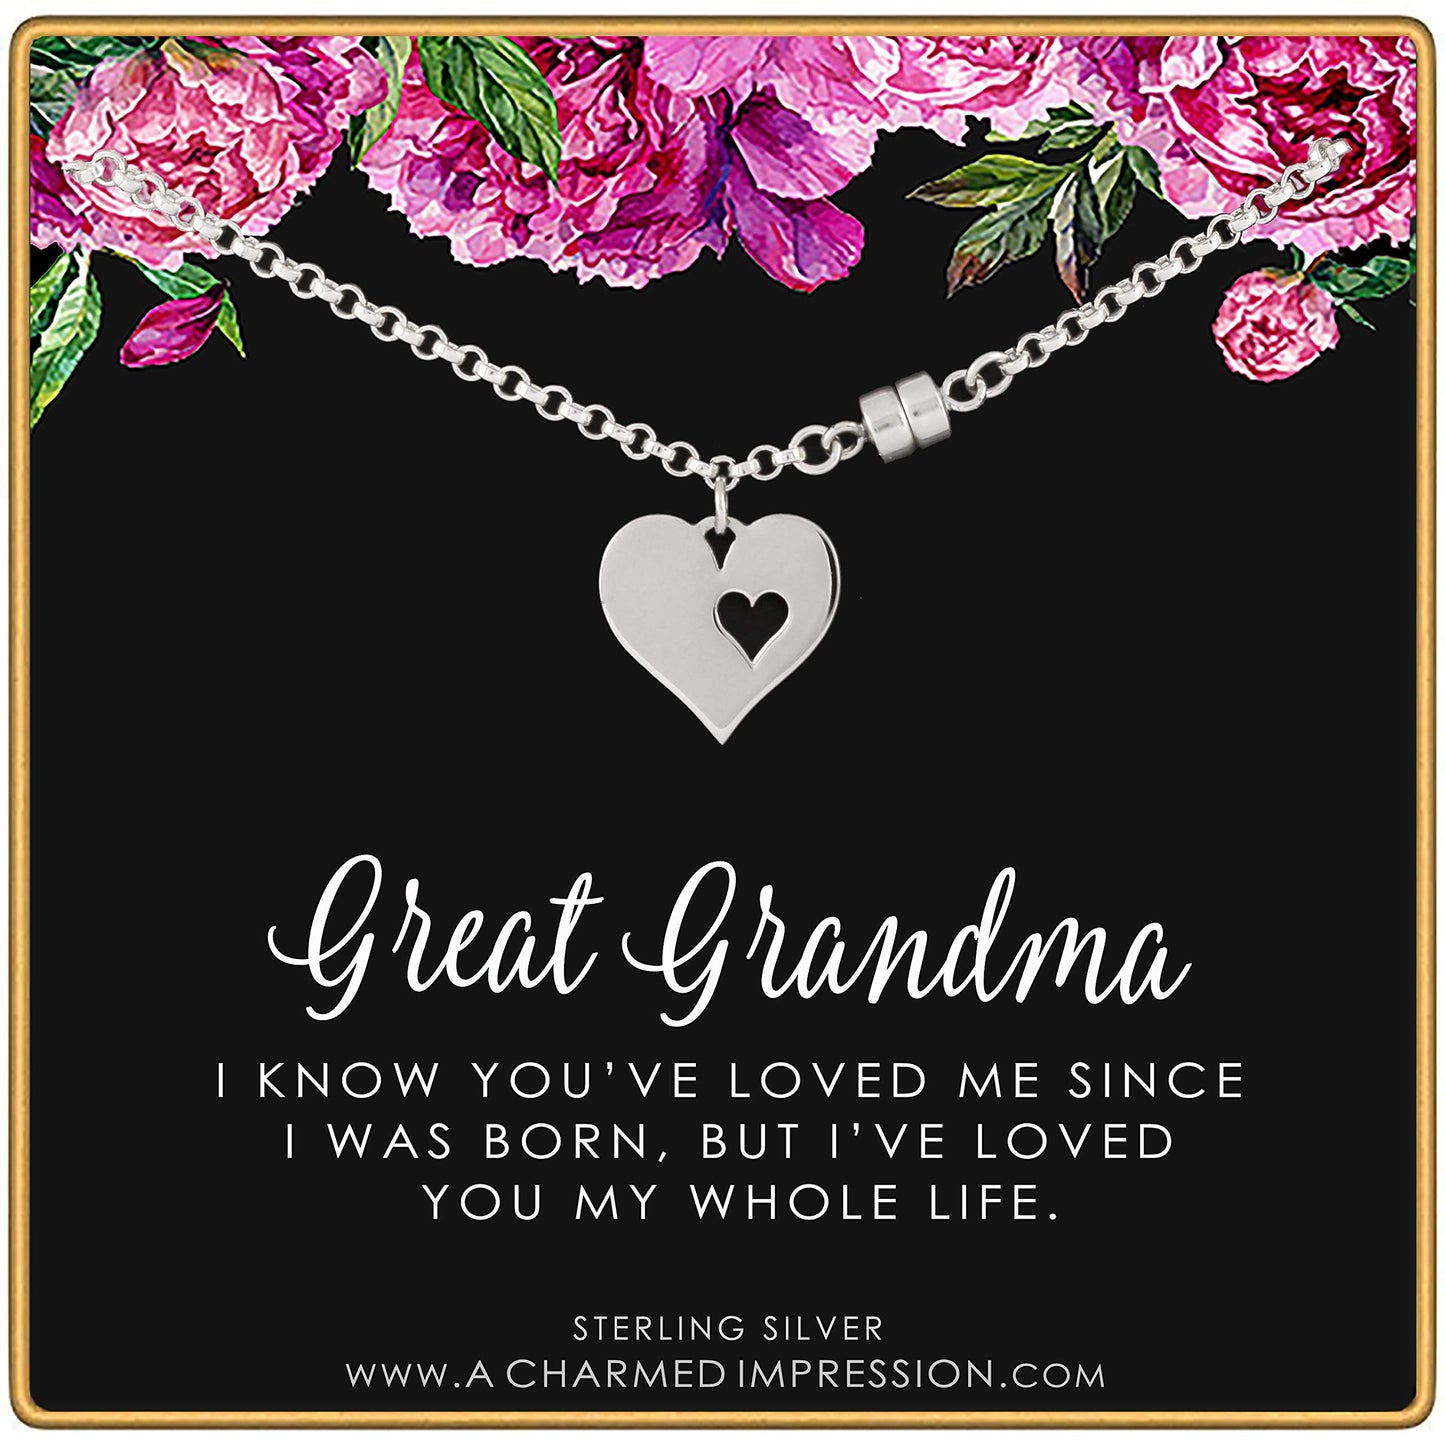 Sterling Silver Great Grandma Bracelet • Gifts from Grandson Granddaughter • Jewelry with Card • Two Hearts Charm Bracelet • Gifts for Women • Grandmother Bracelet • 7 Inch Bracelet • Magnetic Clasp